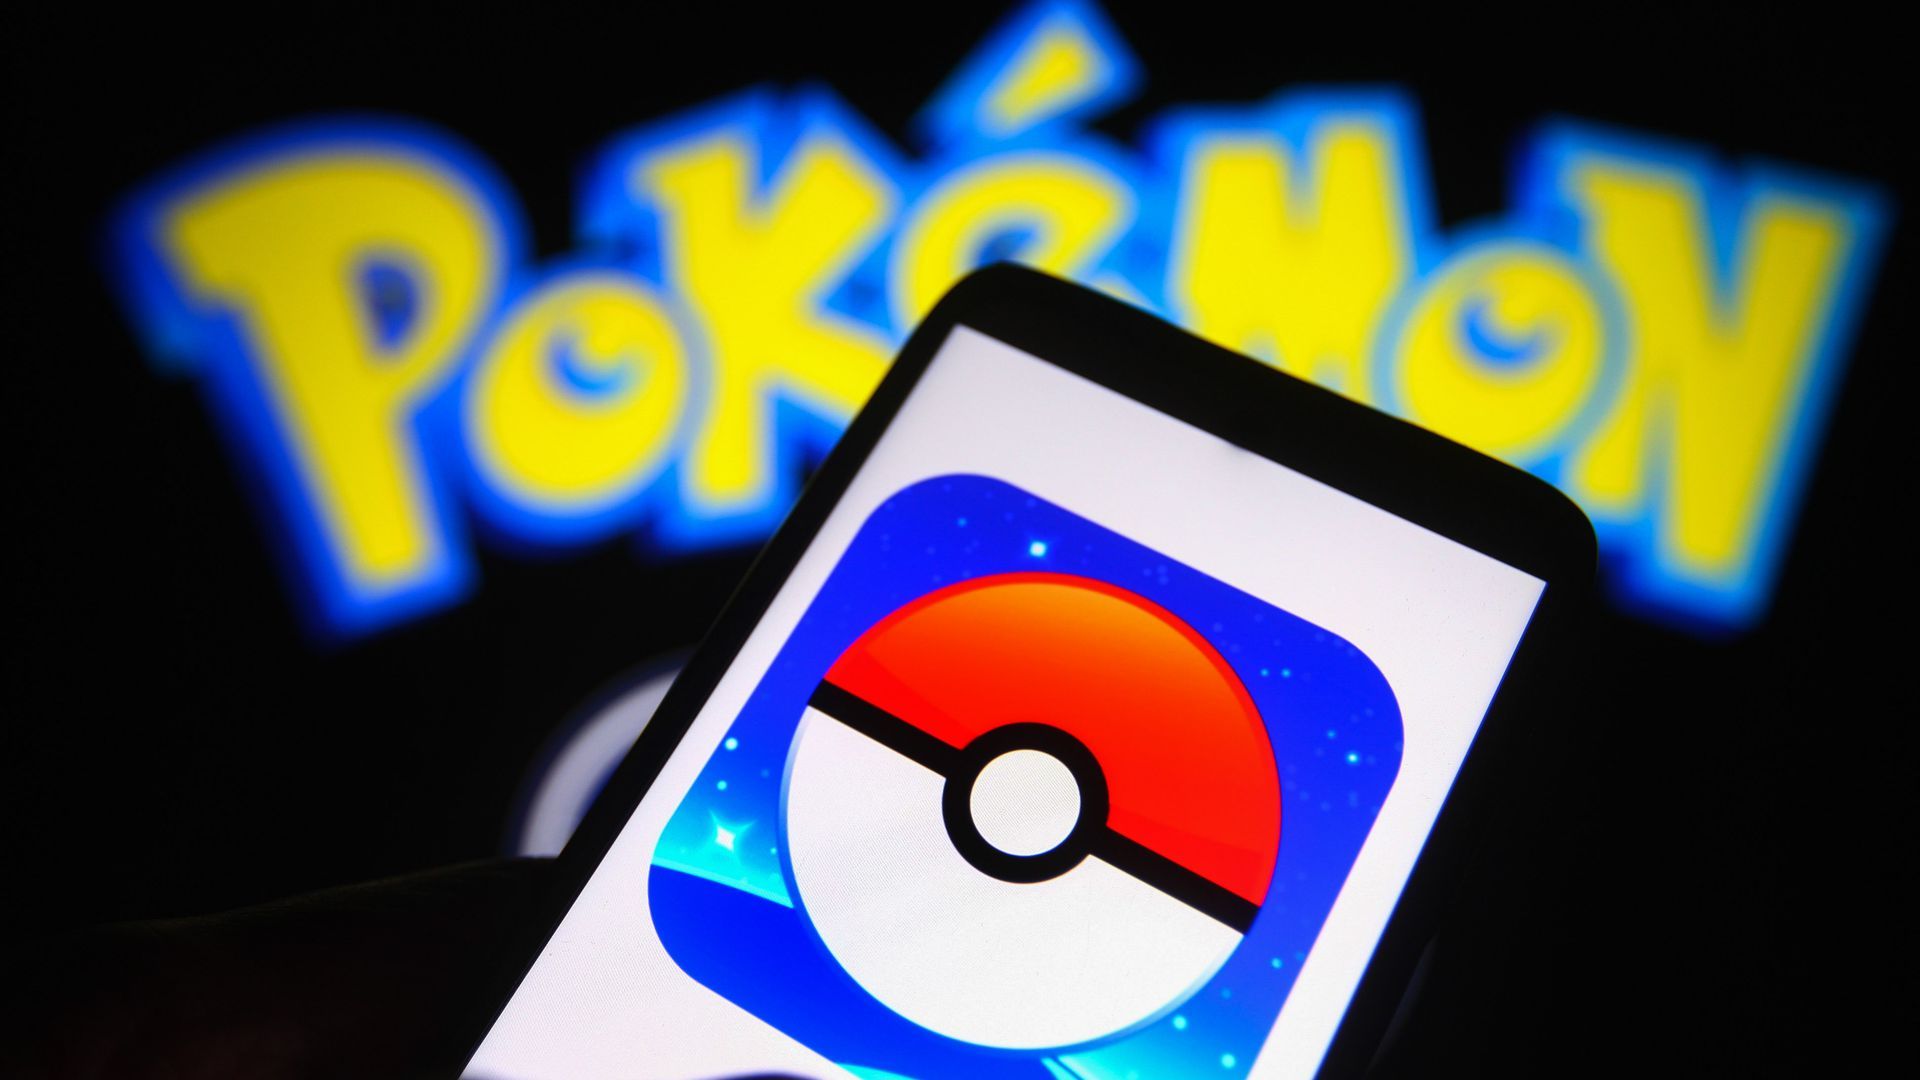 A phone showing a poké ball on its display in front of a Pokémon logo.